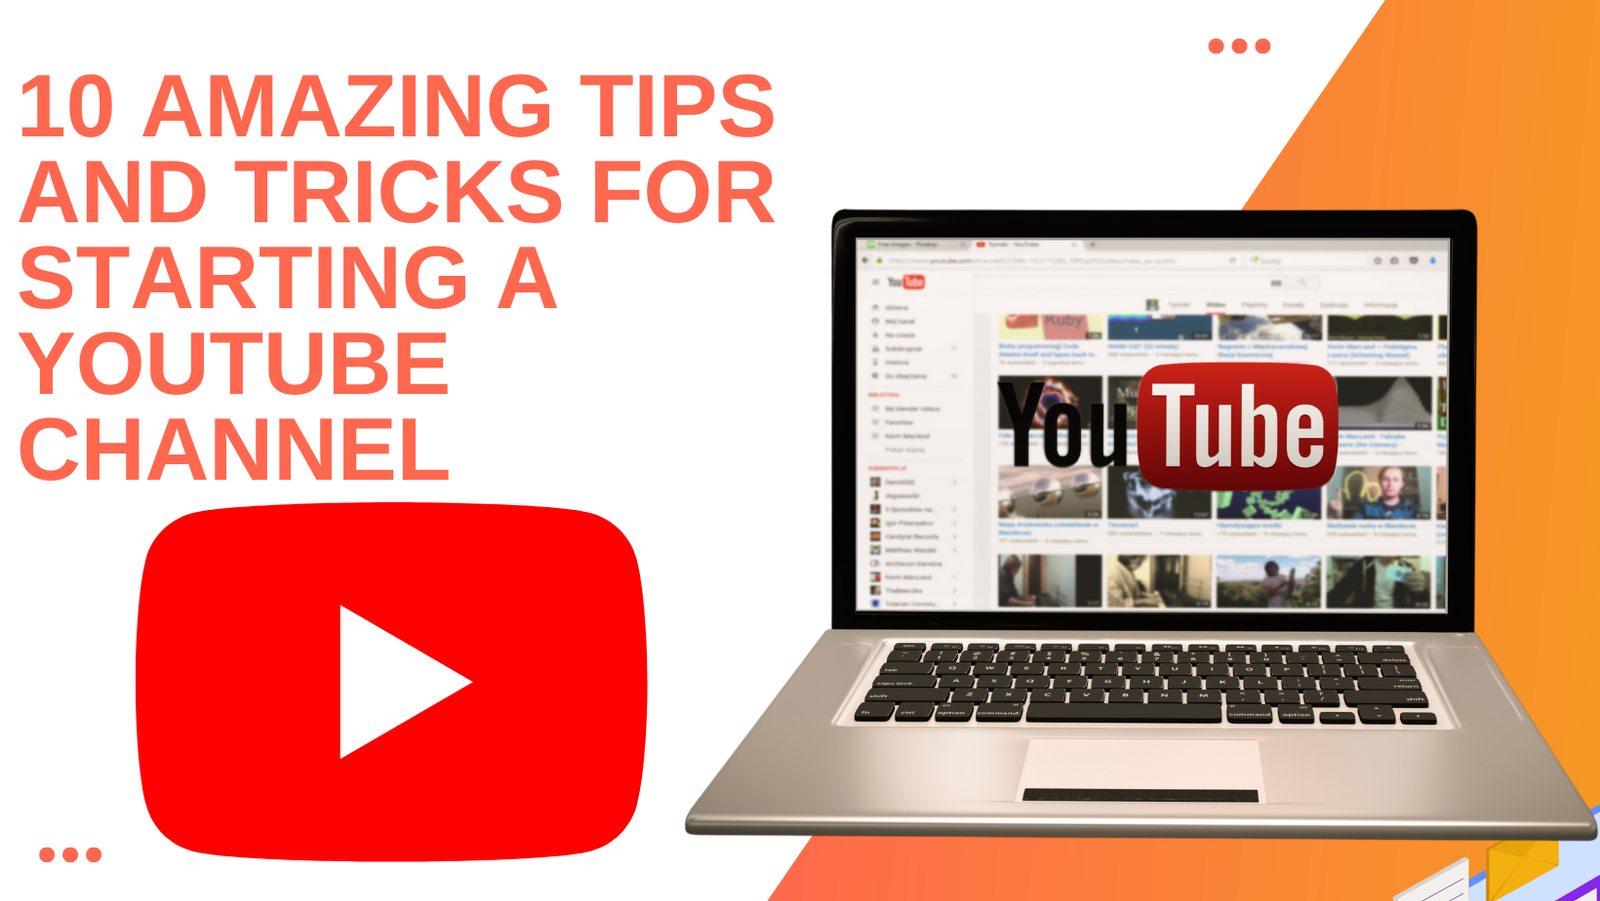 10 Amazing Tips and Tricks for Starting a YouTube Channel